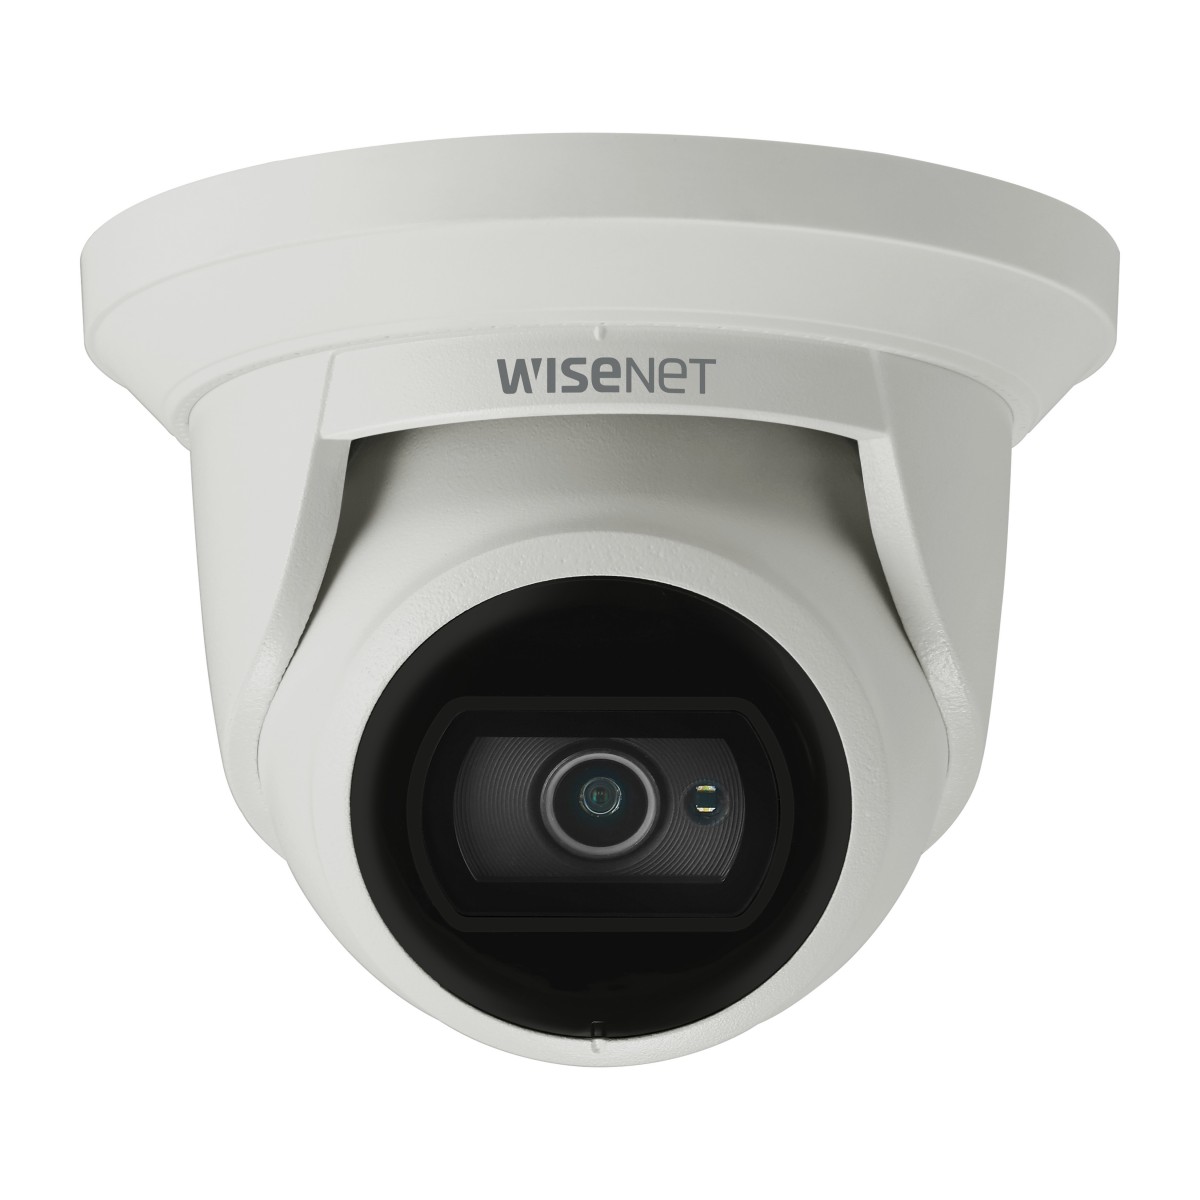 Hanwha Techwin Hanwha QNE-8011R - IP security camera - Indoor & outdoor - Wired - Dome - Ceiling/Wall - Black,White